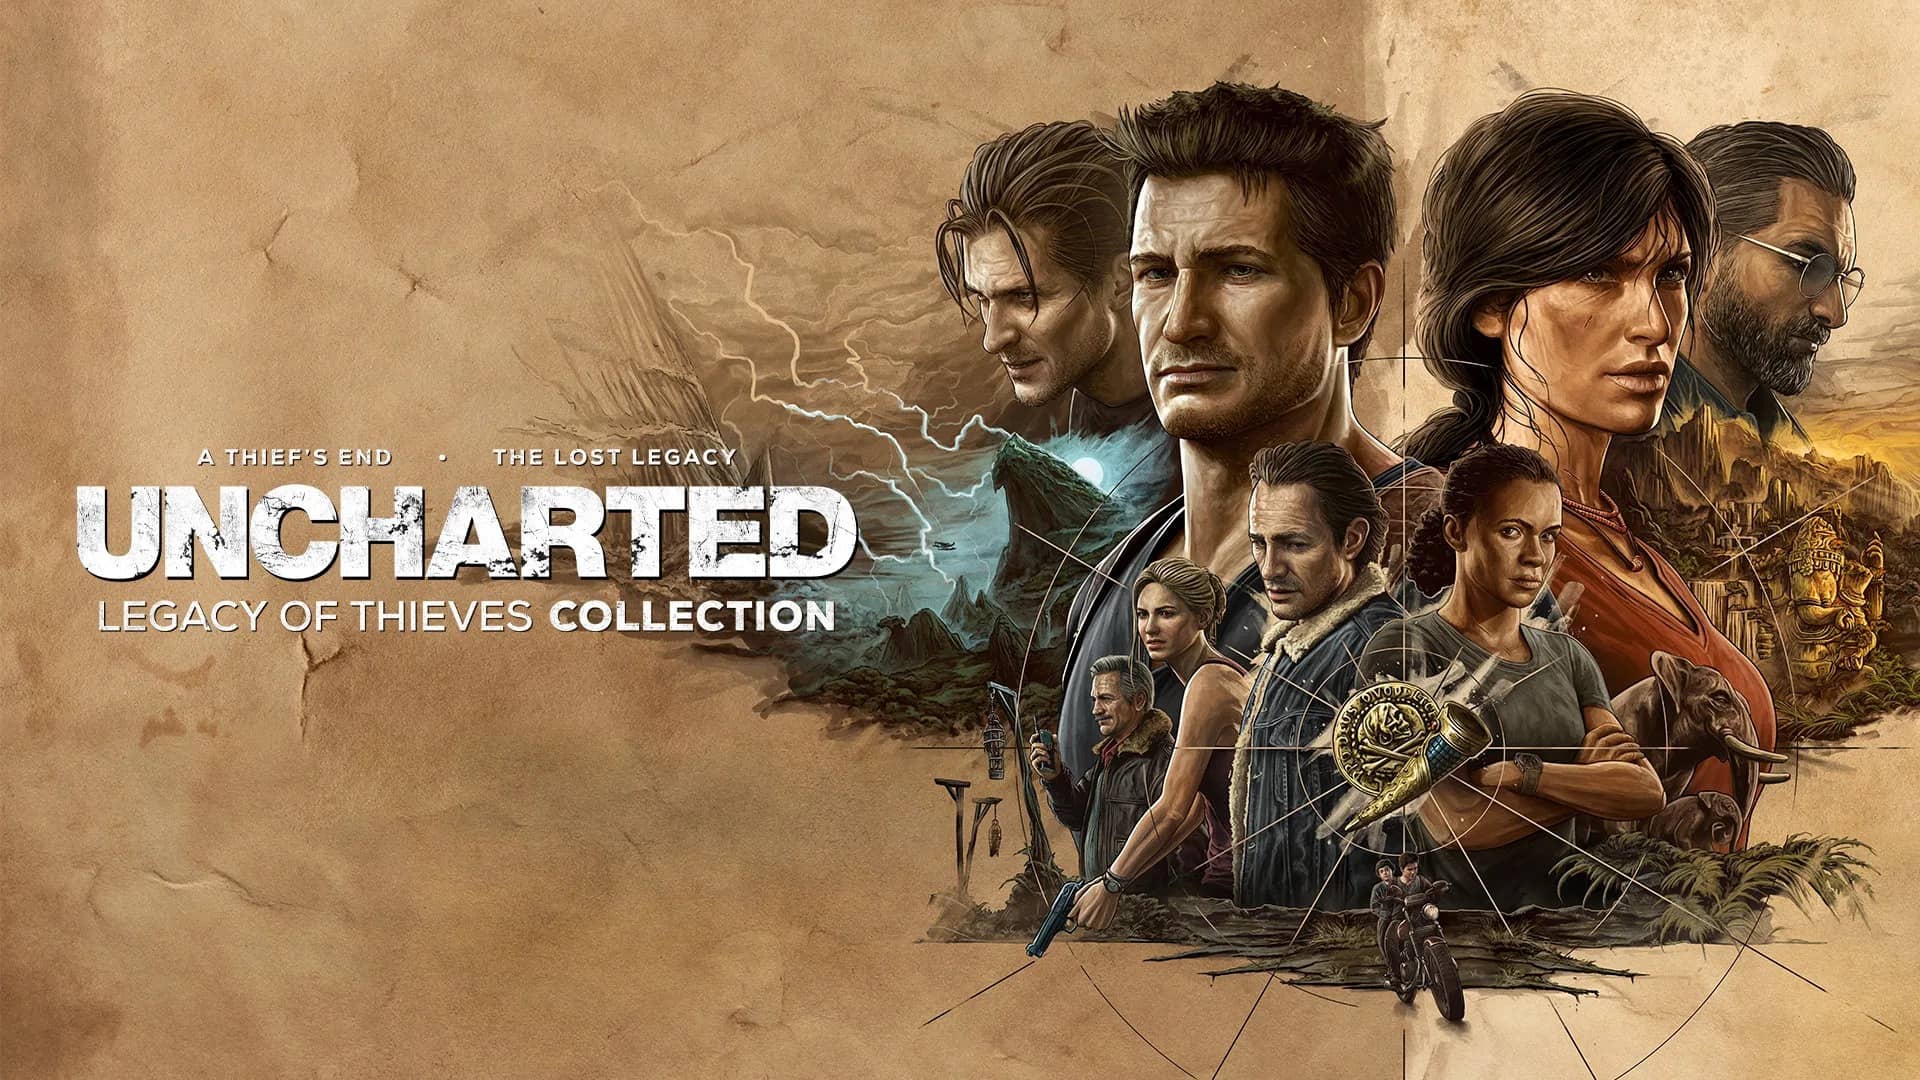 Uncharted 4: A Thief's End: Vale a Pena?